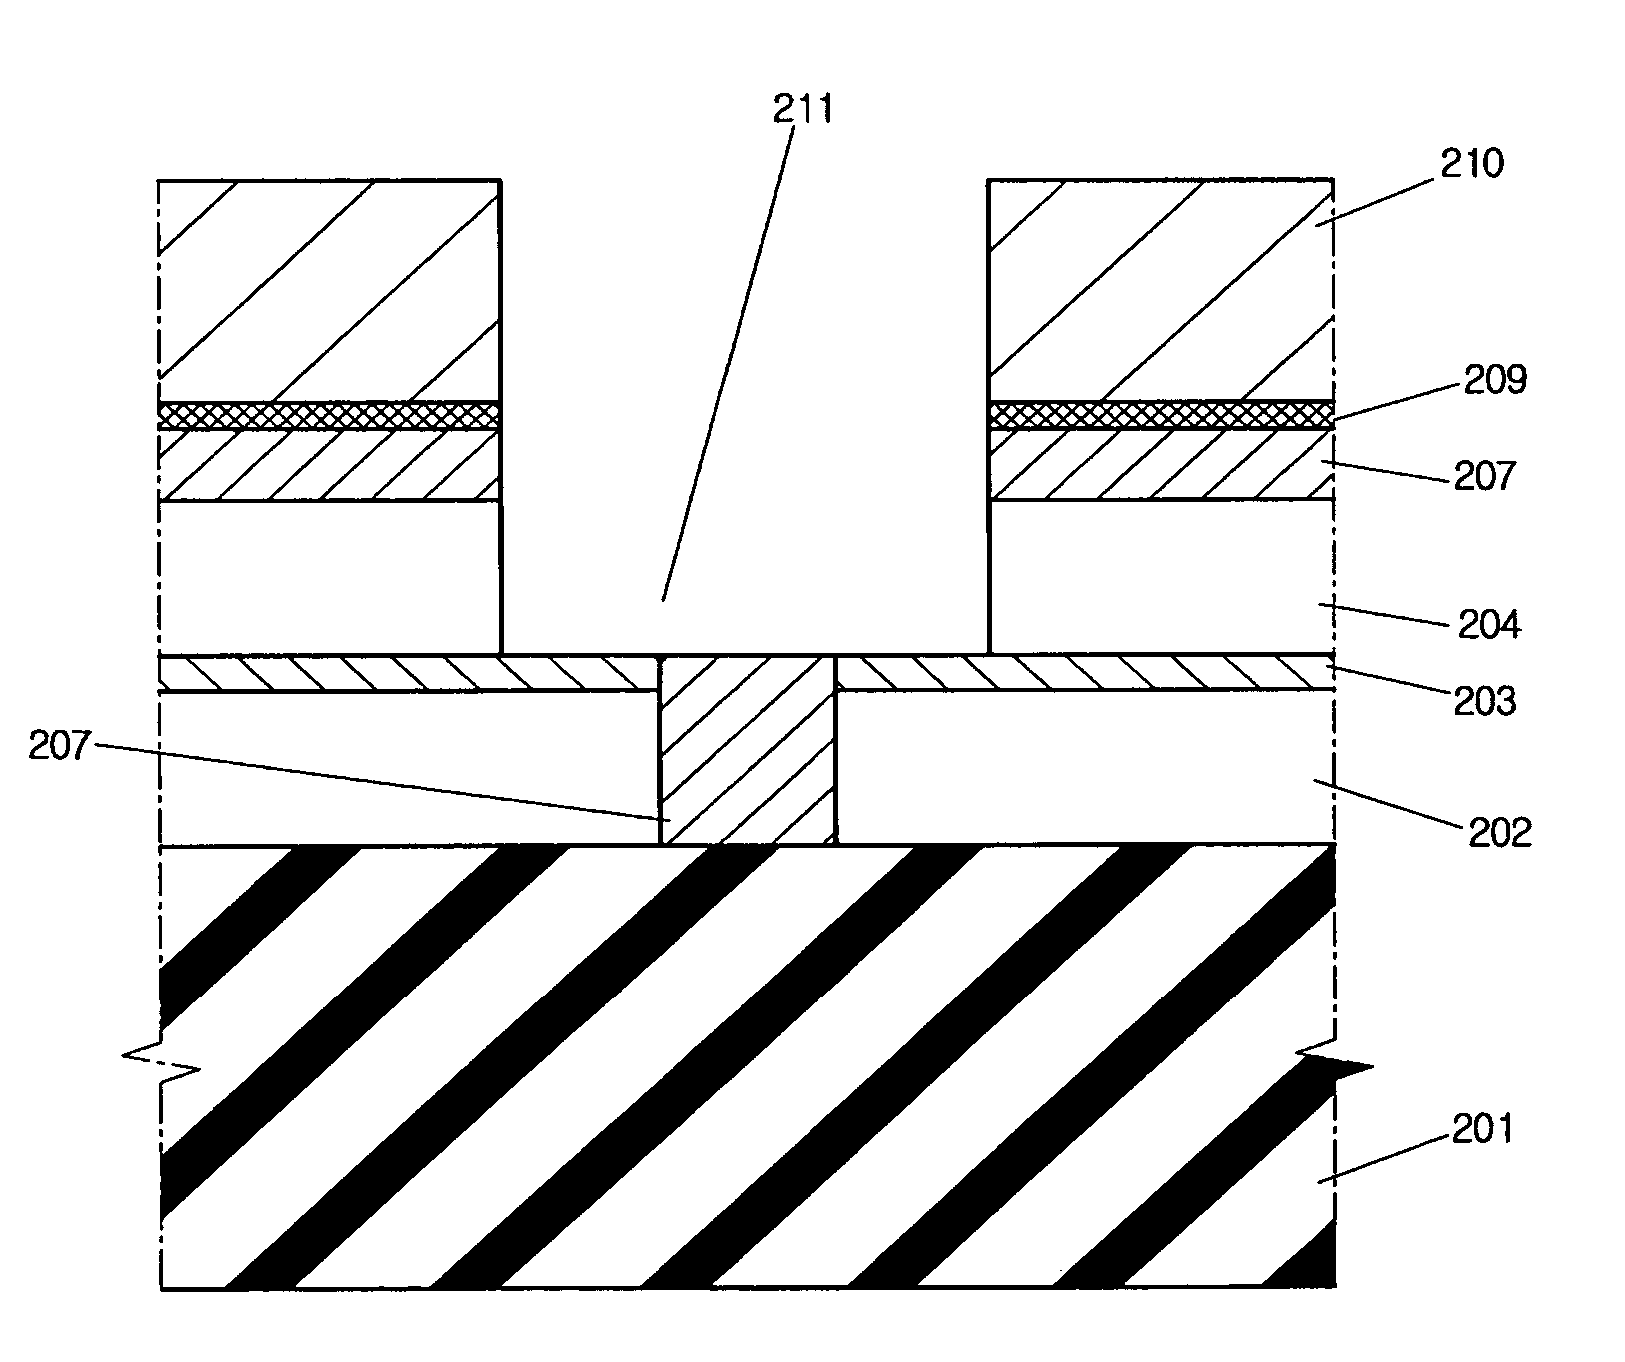 Method for preventing the formation of a void in a bottom anti-reflective coating filling a via hole